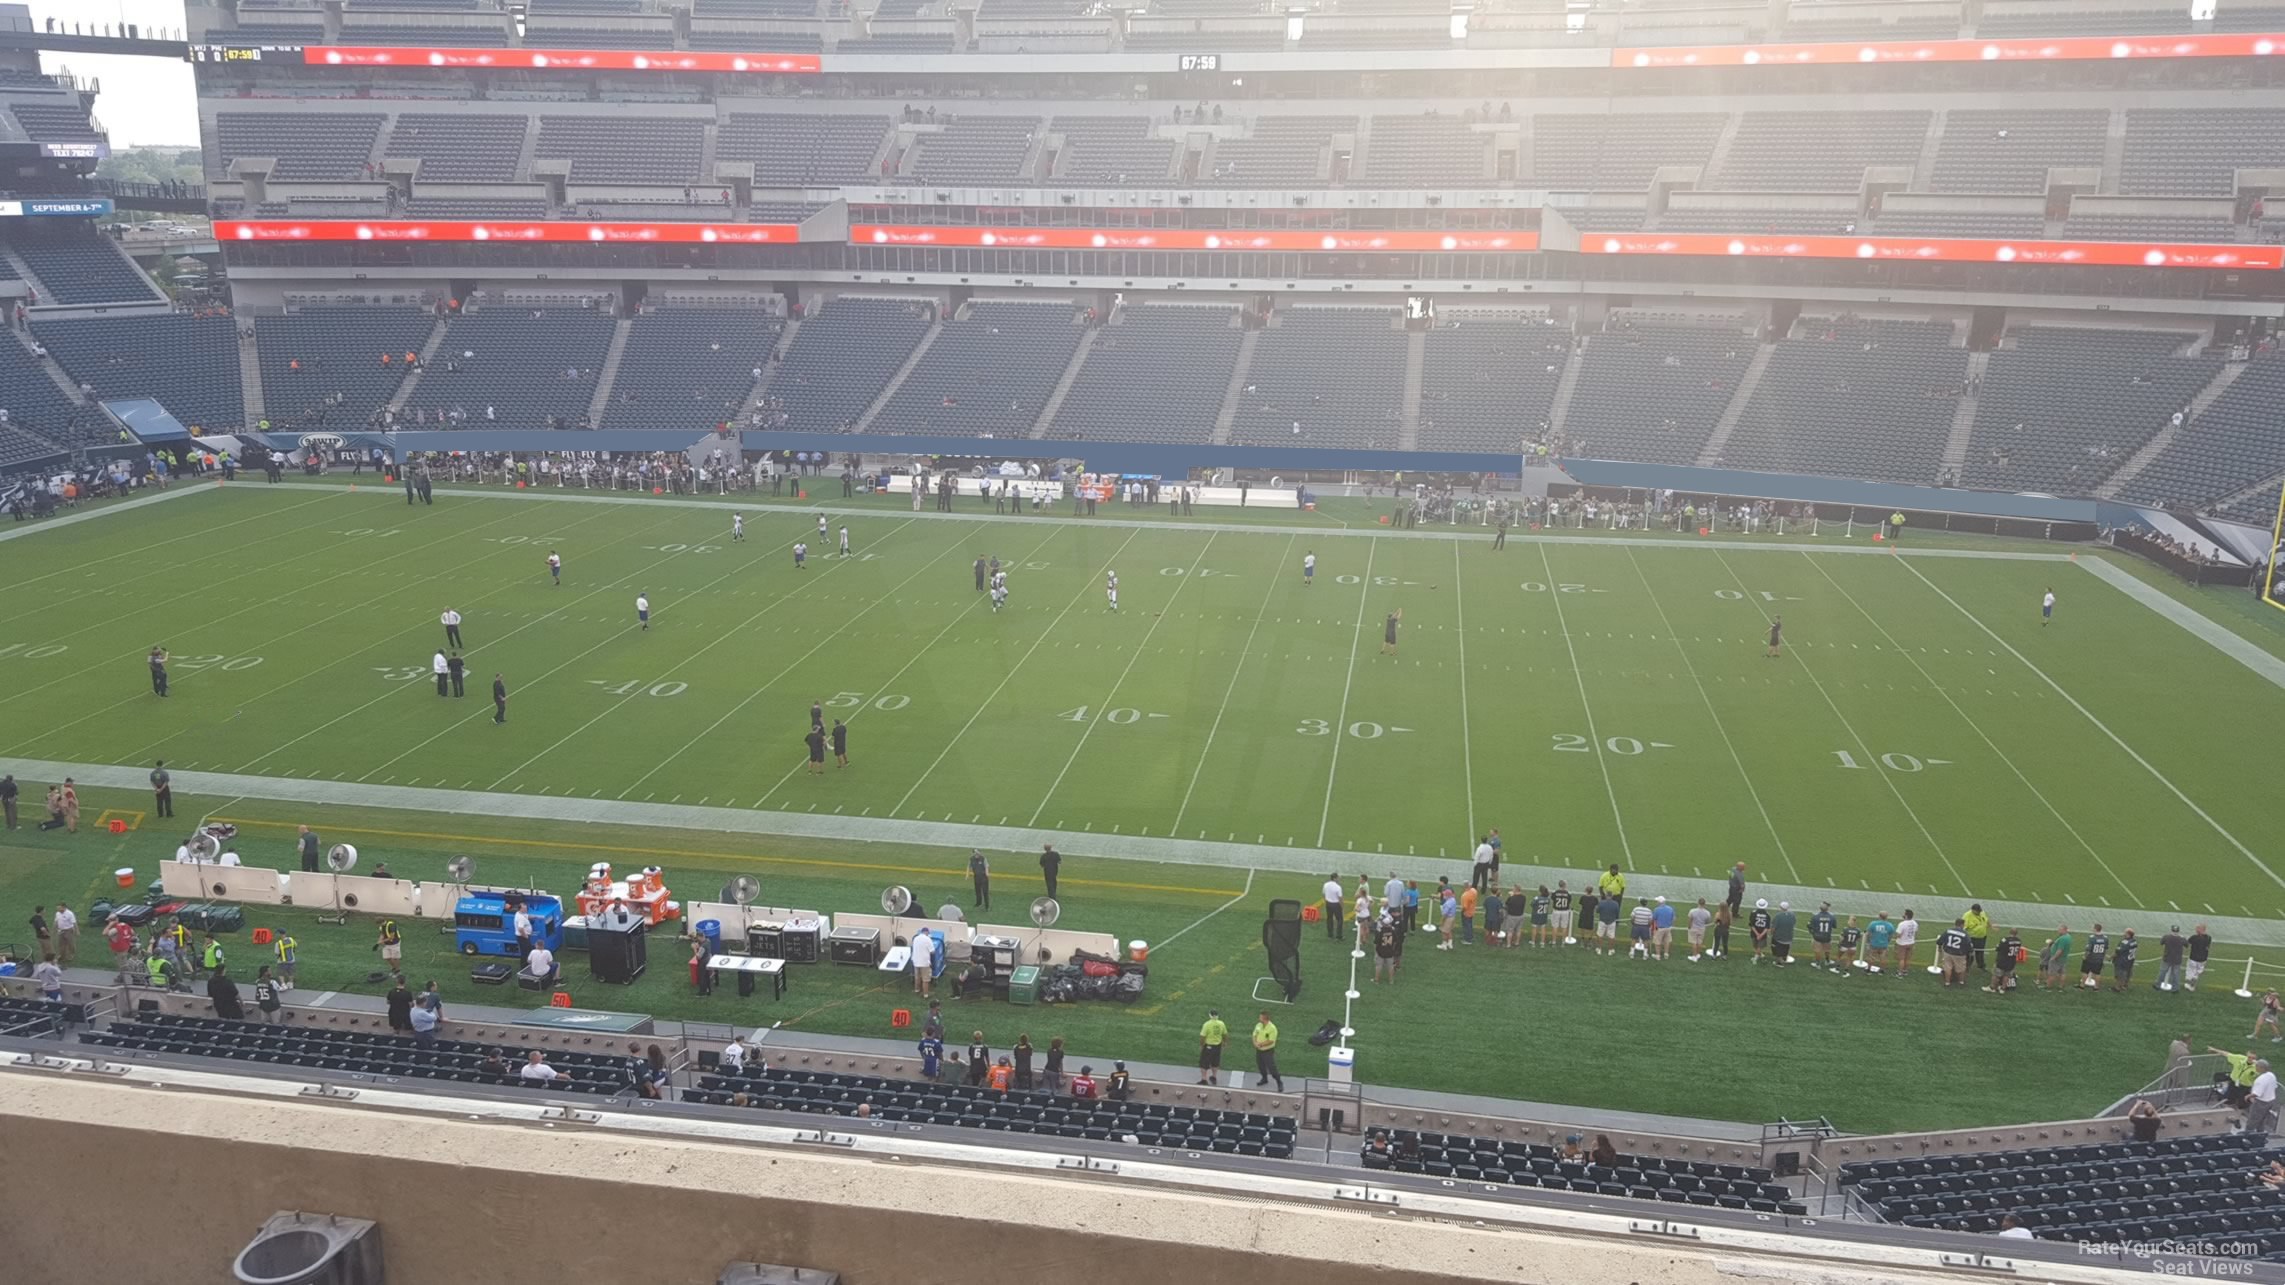 section c23, row 7 seat view  for football - lincoln financial field